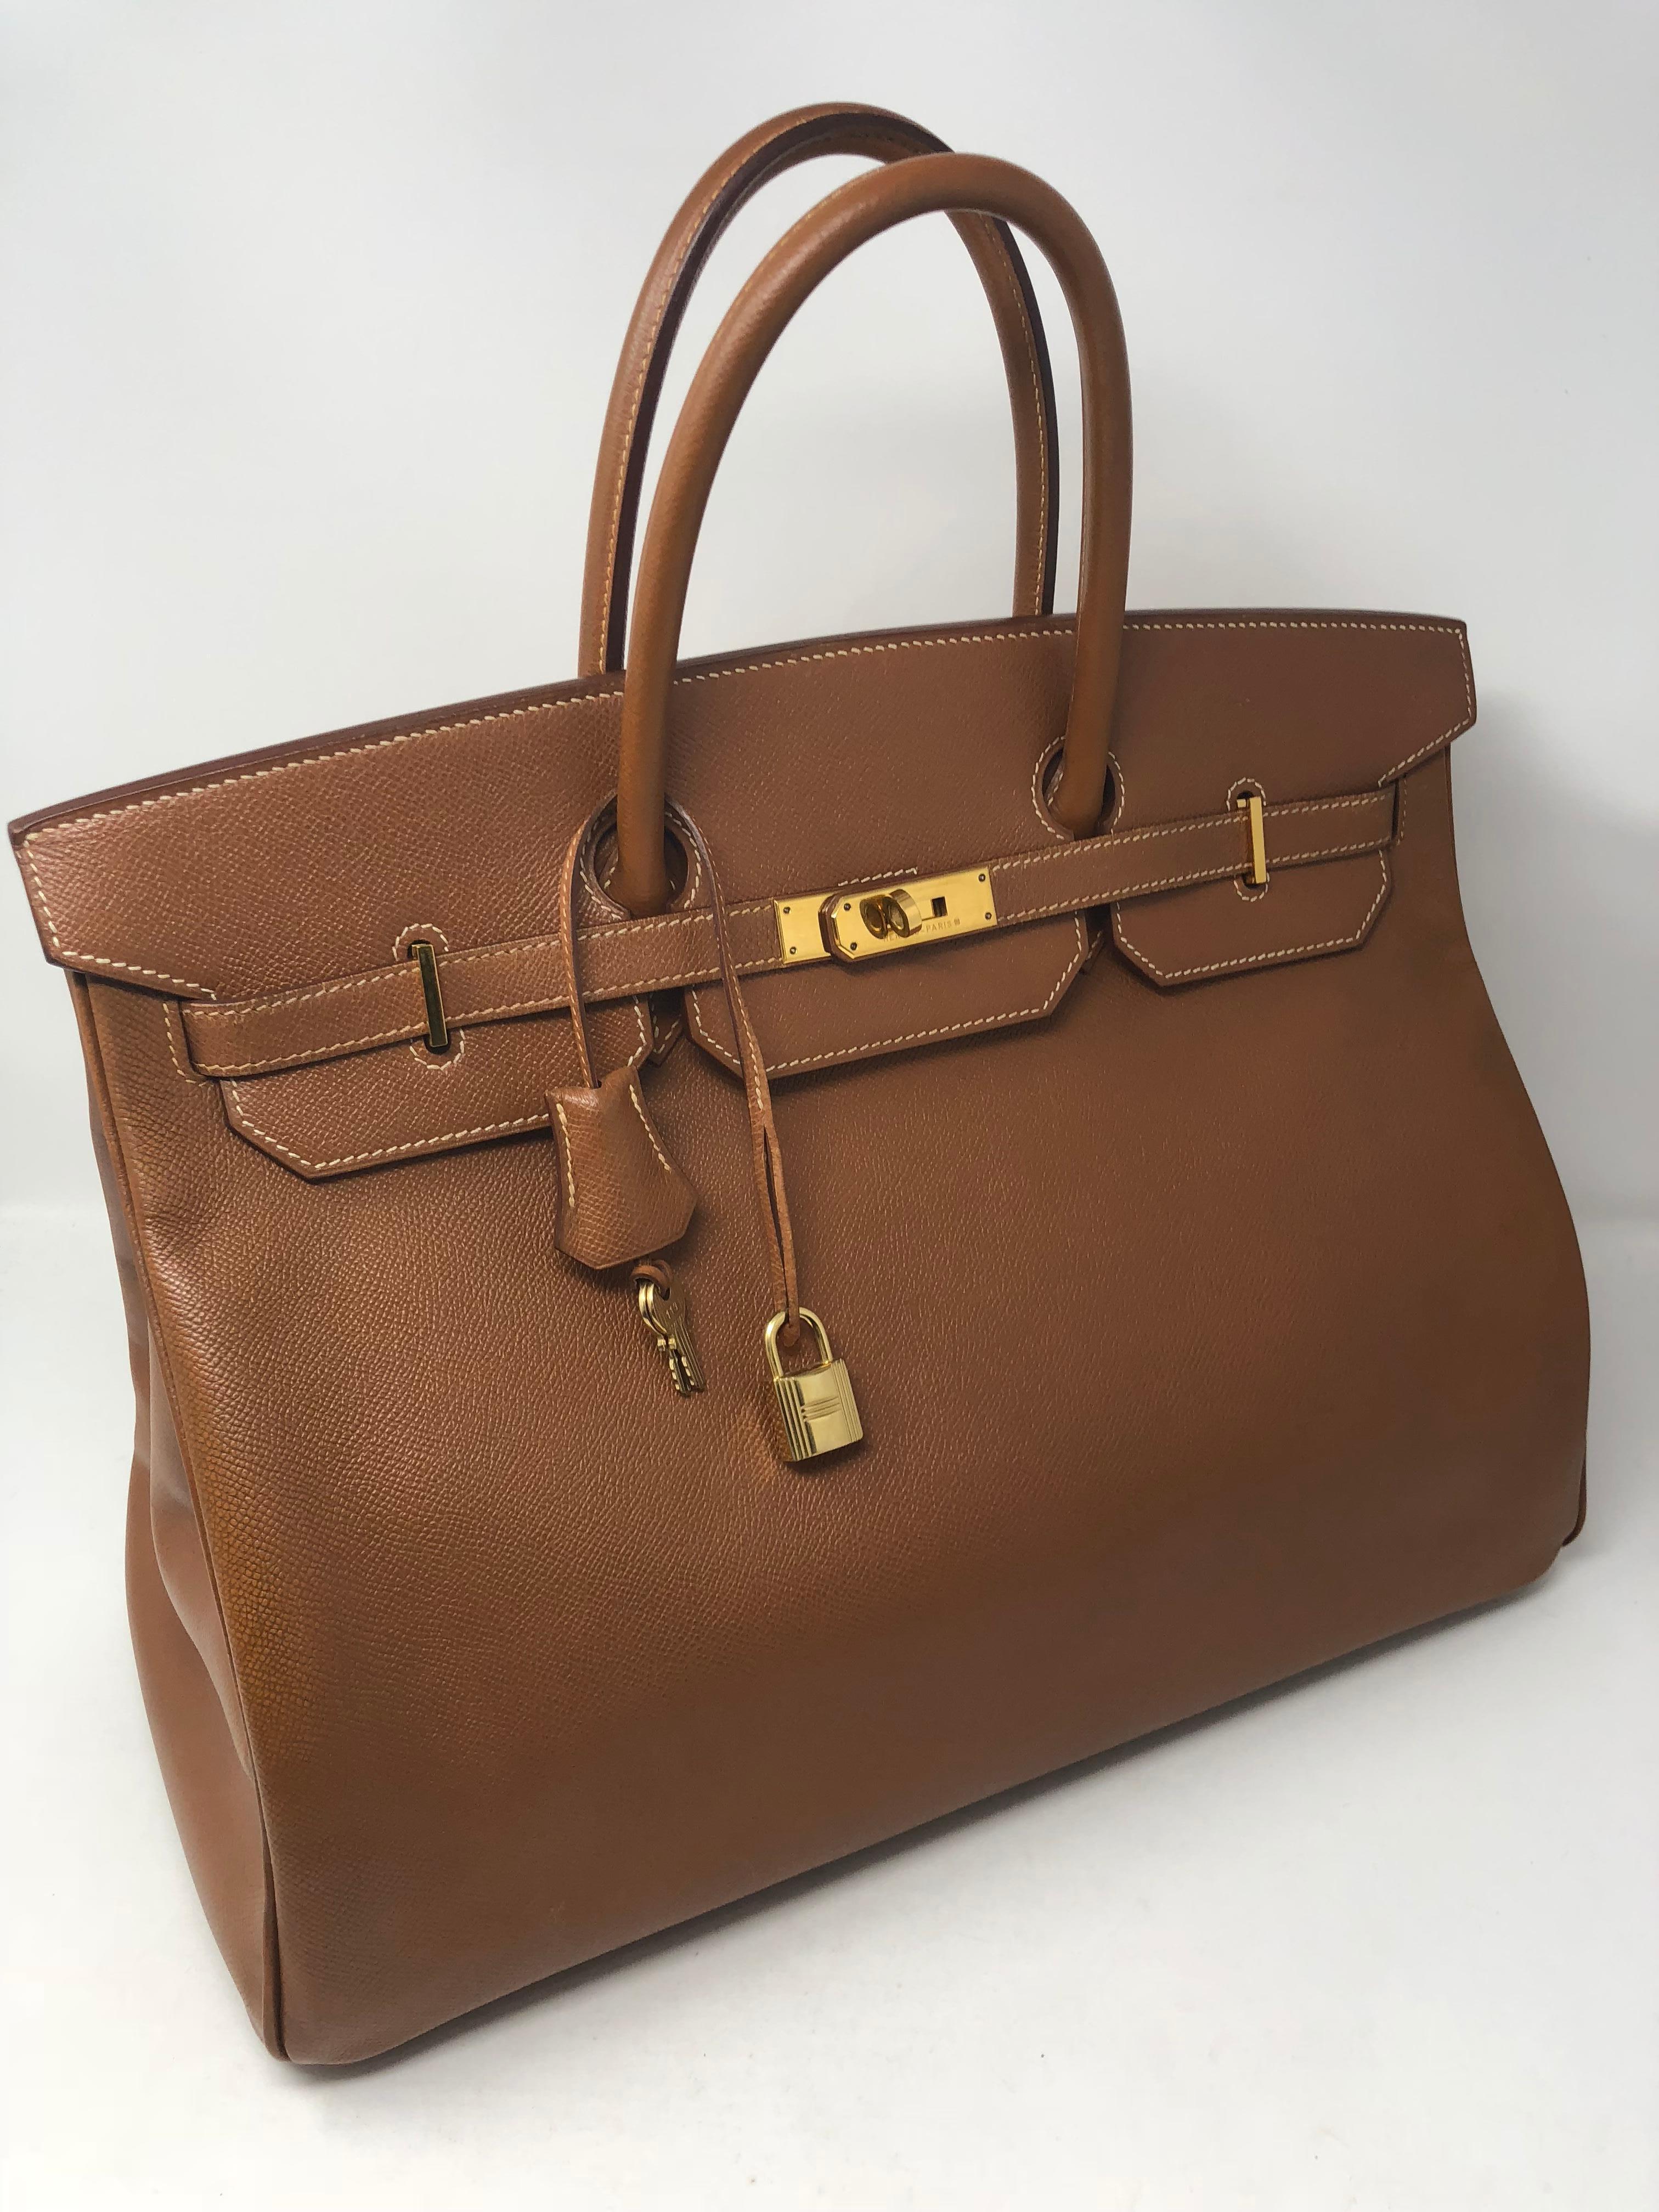 Hermes Birkin 40 in Gold color with gold hardware. Vintage Birkin in good condition. Beautiful tan gold color is neutral and desired. Guaranteed authentic. 